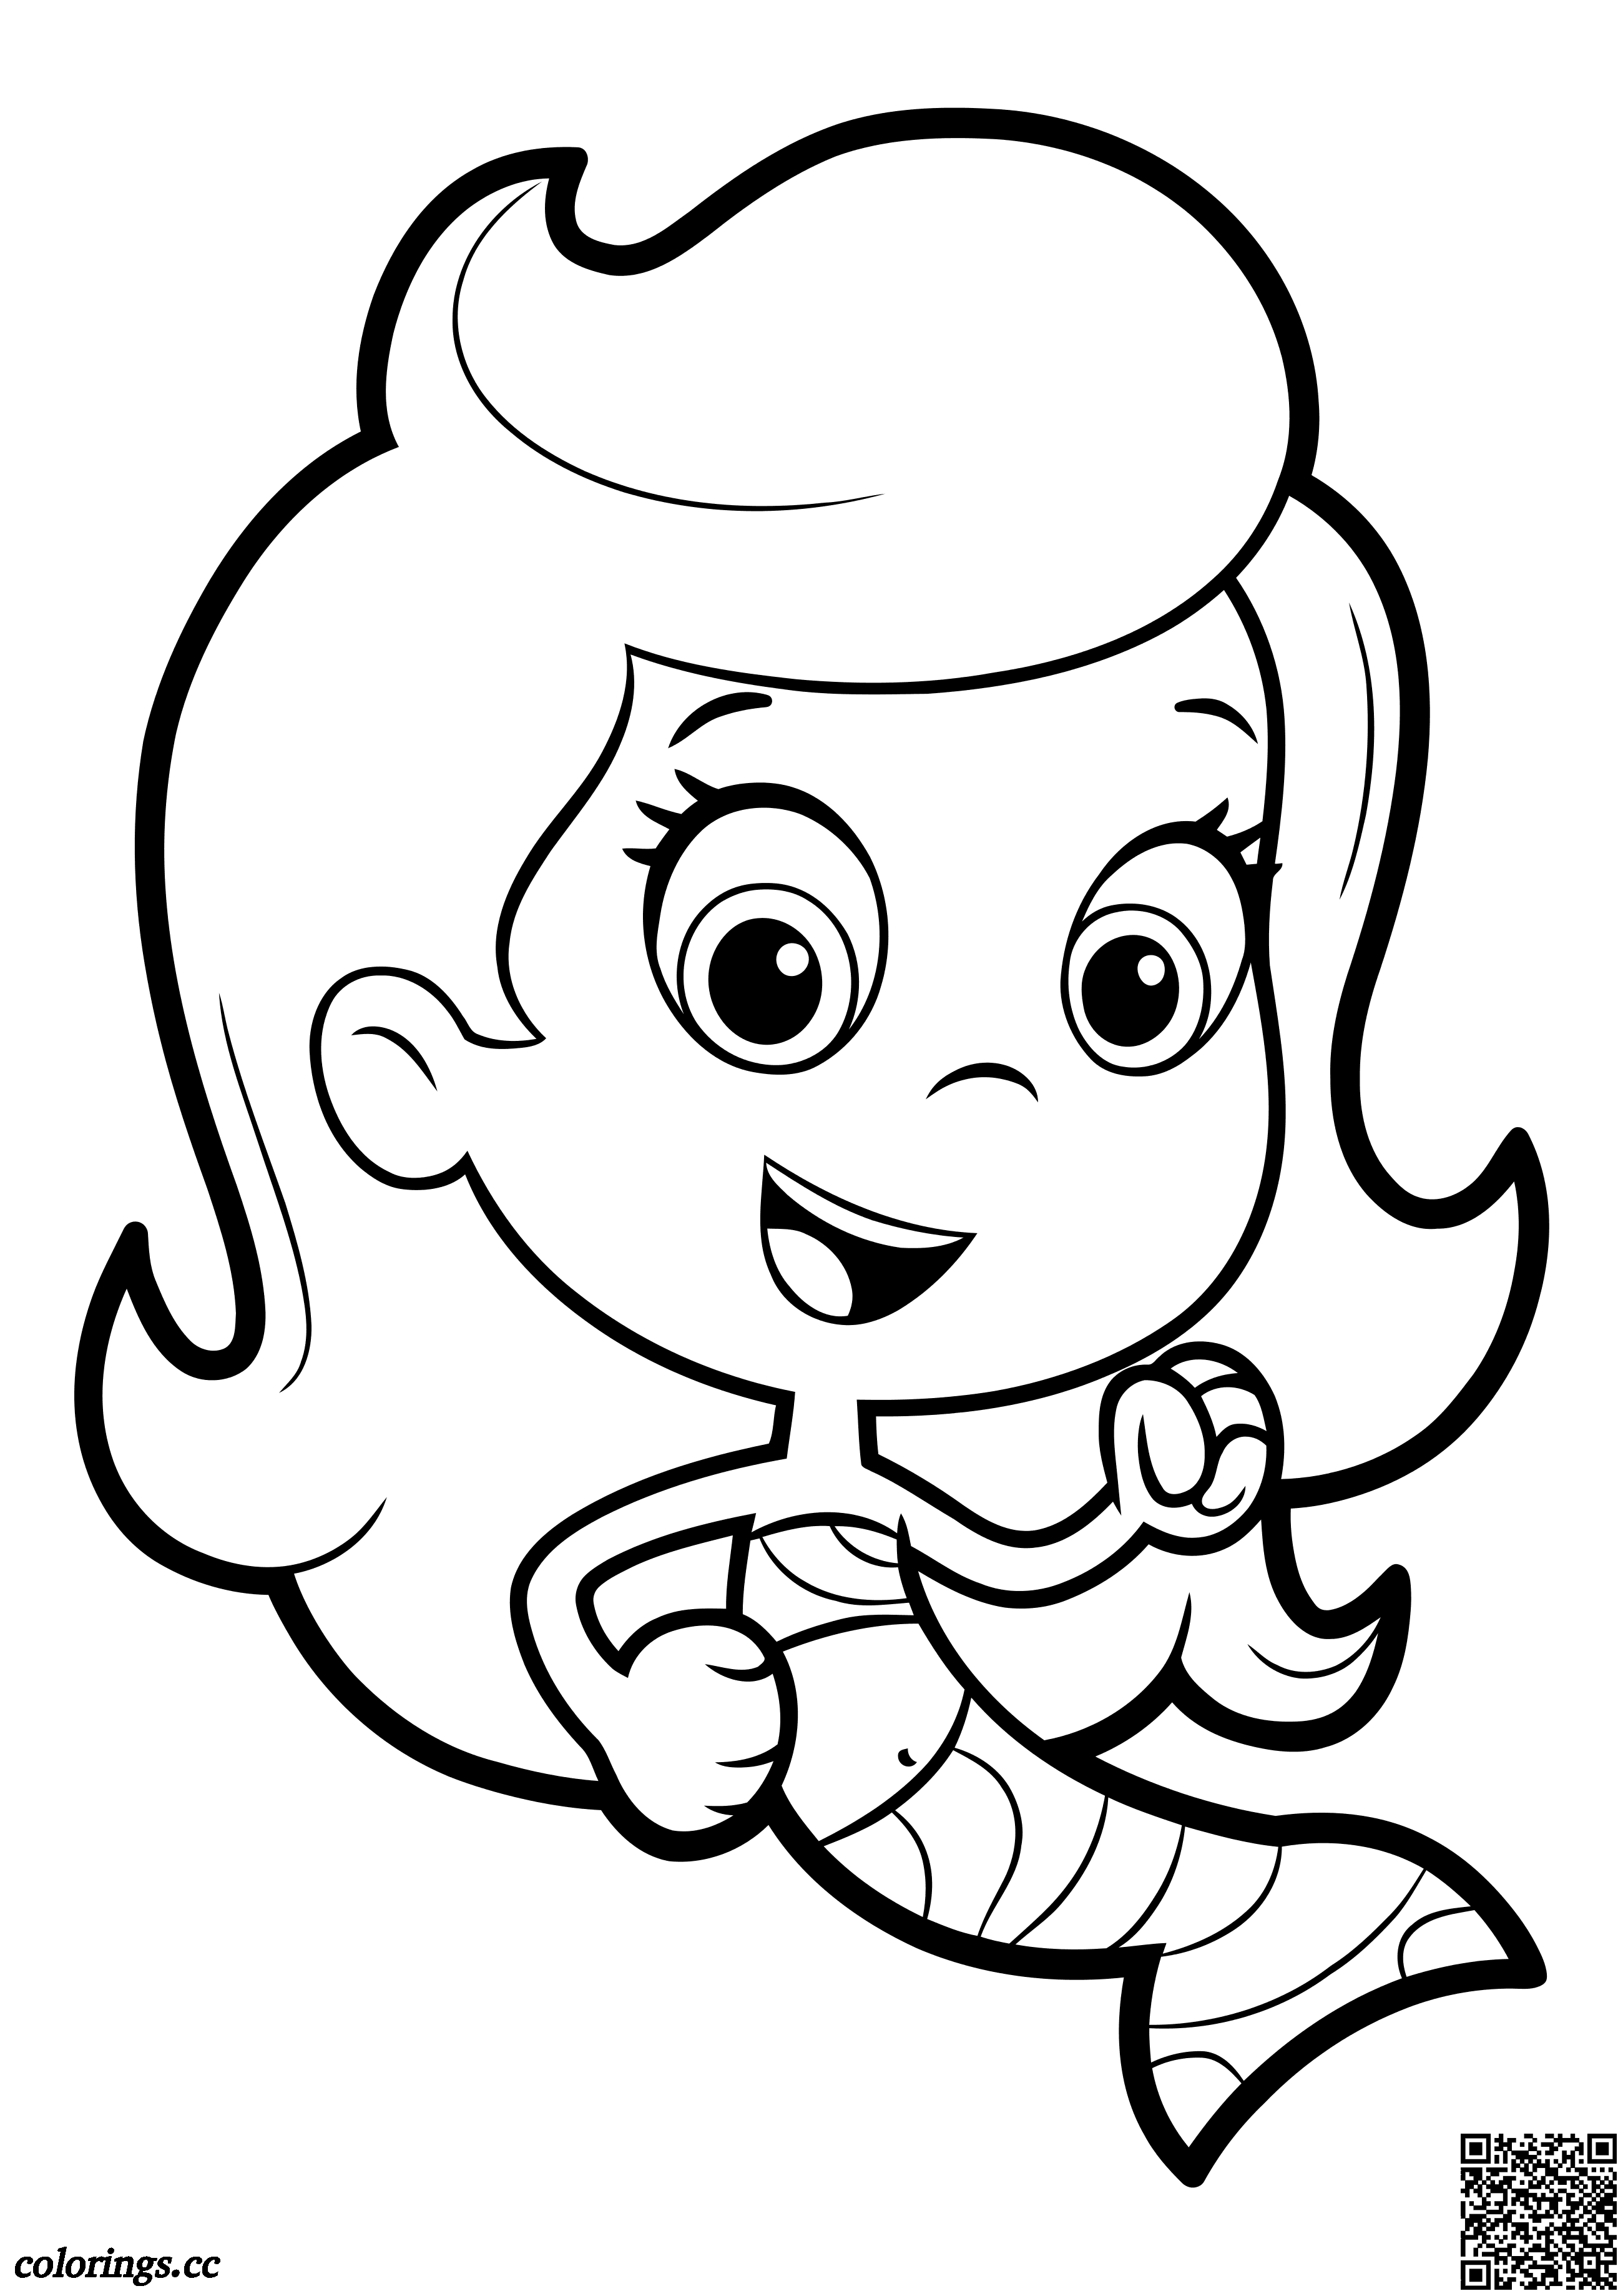 Guppy girl Molly coloring pages, Guppies and bubbles coloring pages ...